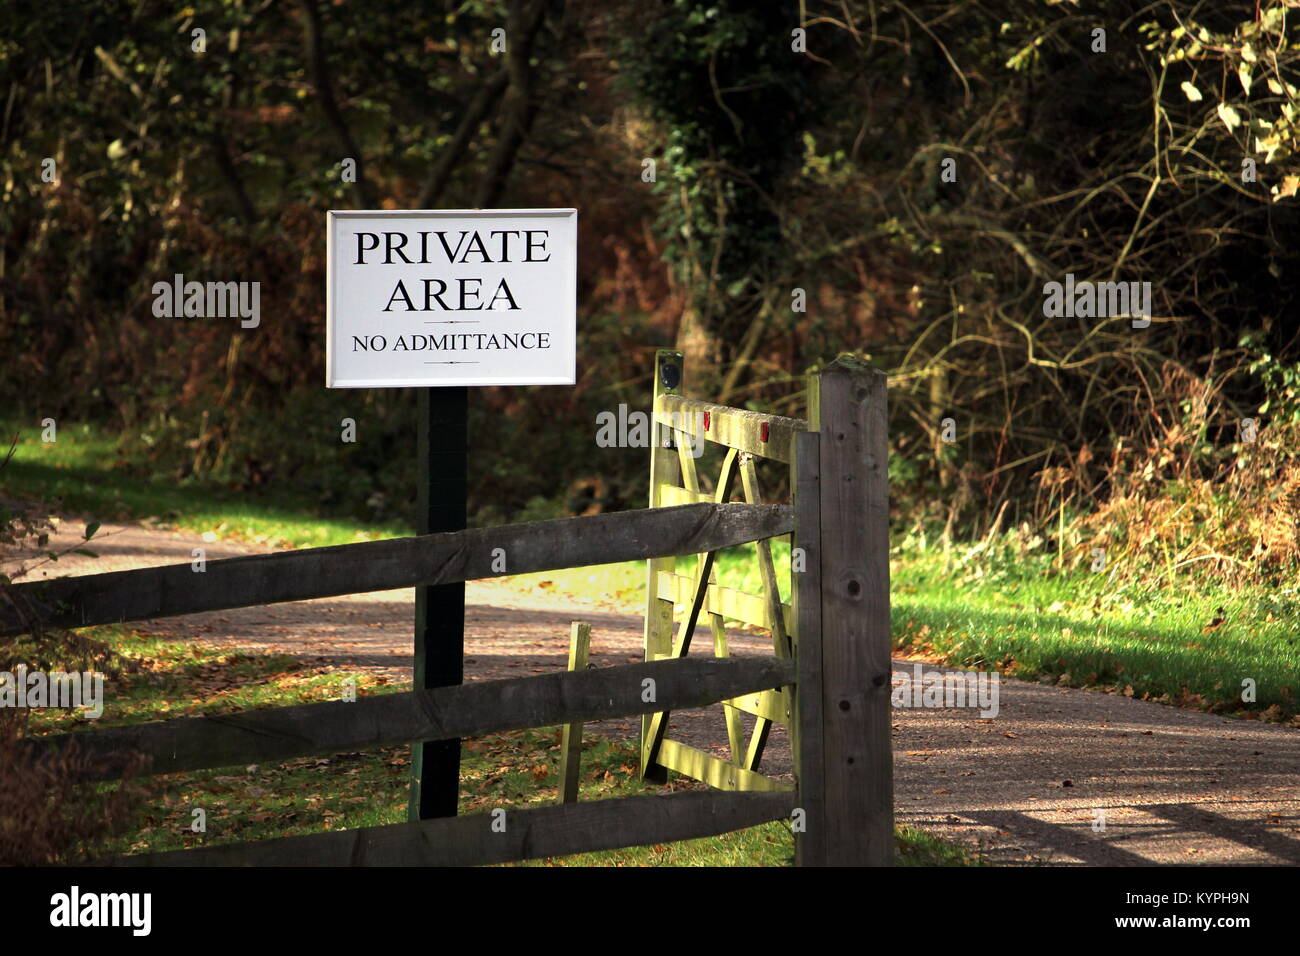 Wooden gate on a road through forest or woodland, with a sign saying 'PRIVATE AREA No Admittance' Stock Photo